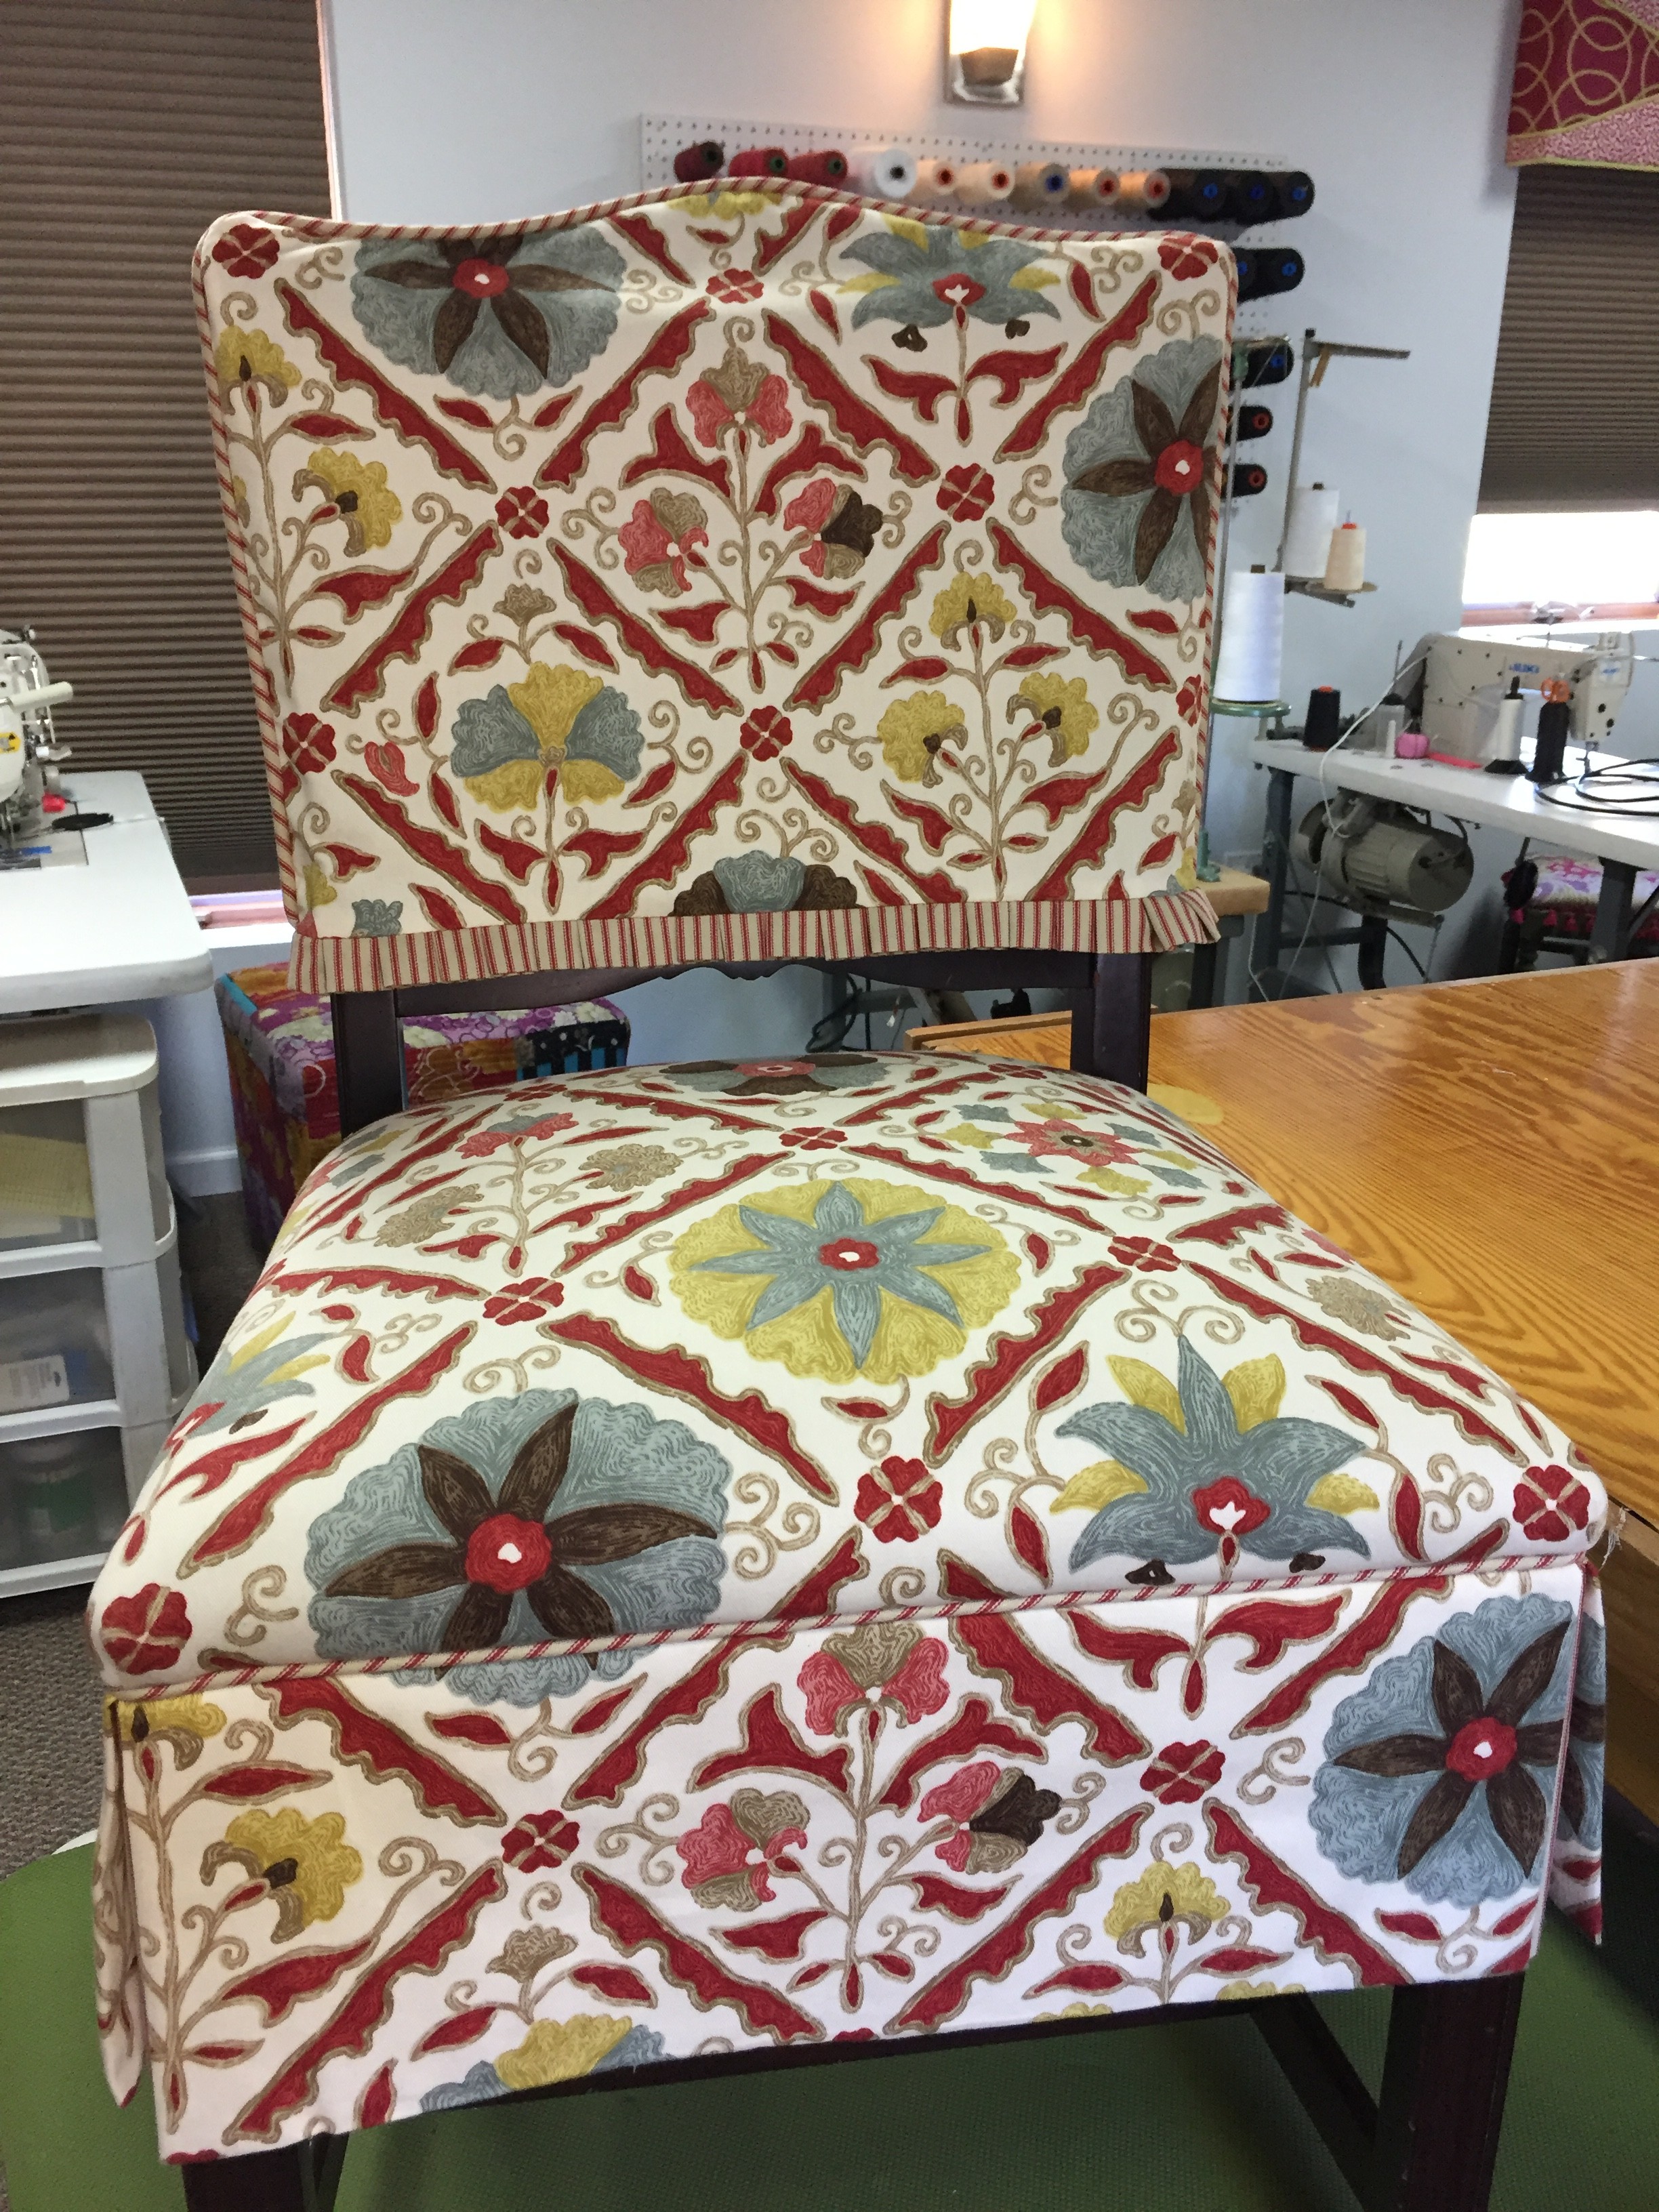 Fun little dining chair upholstery